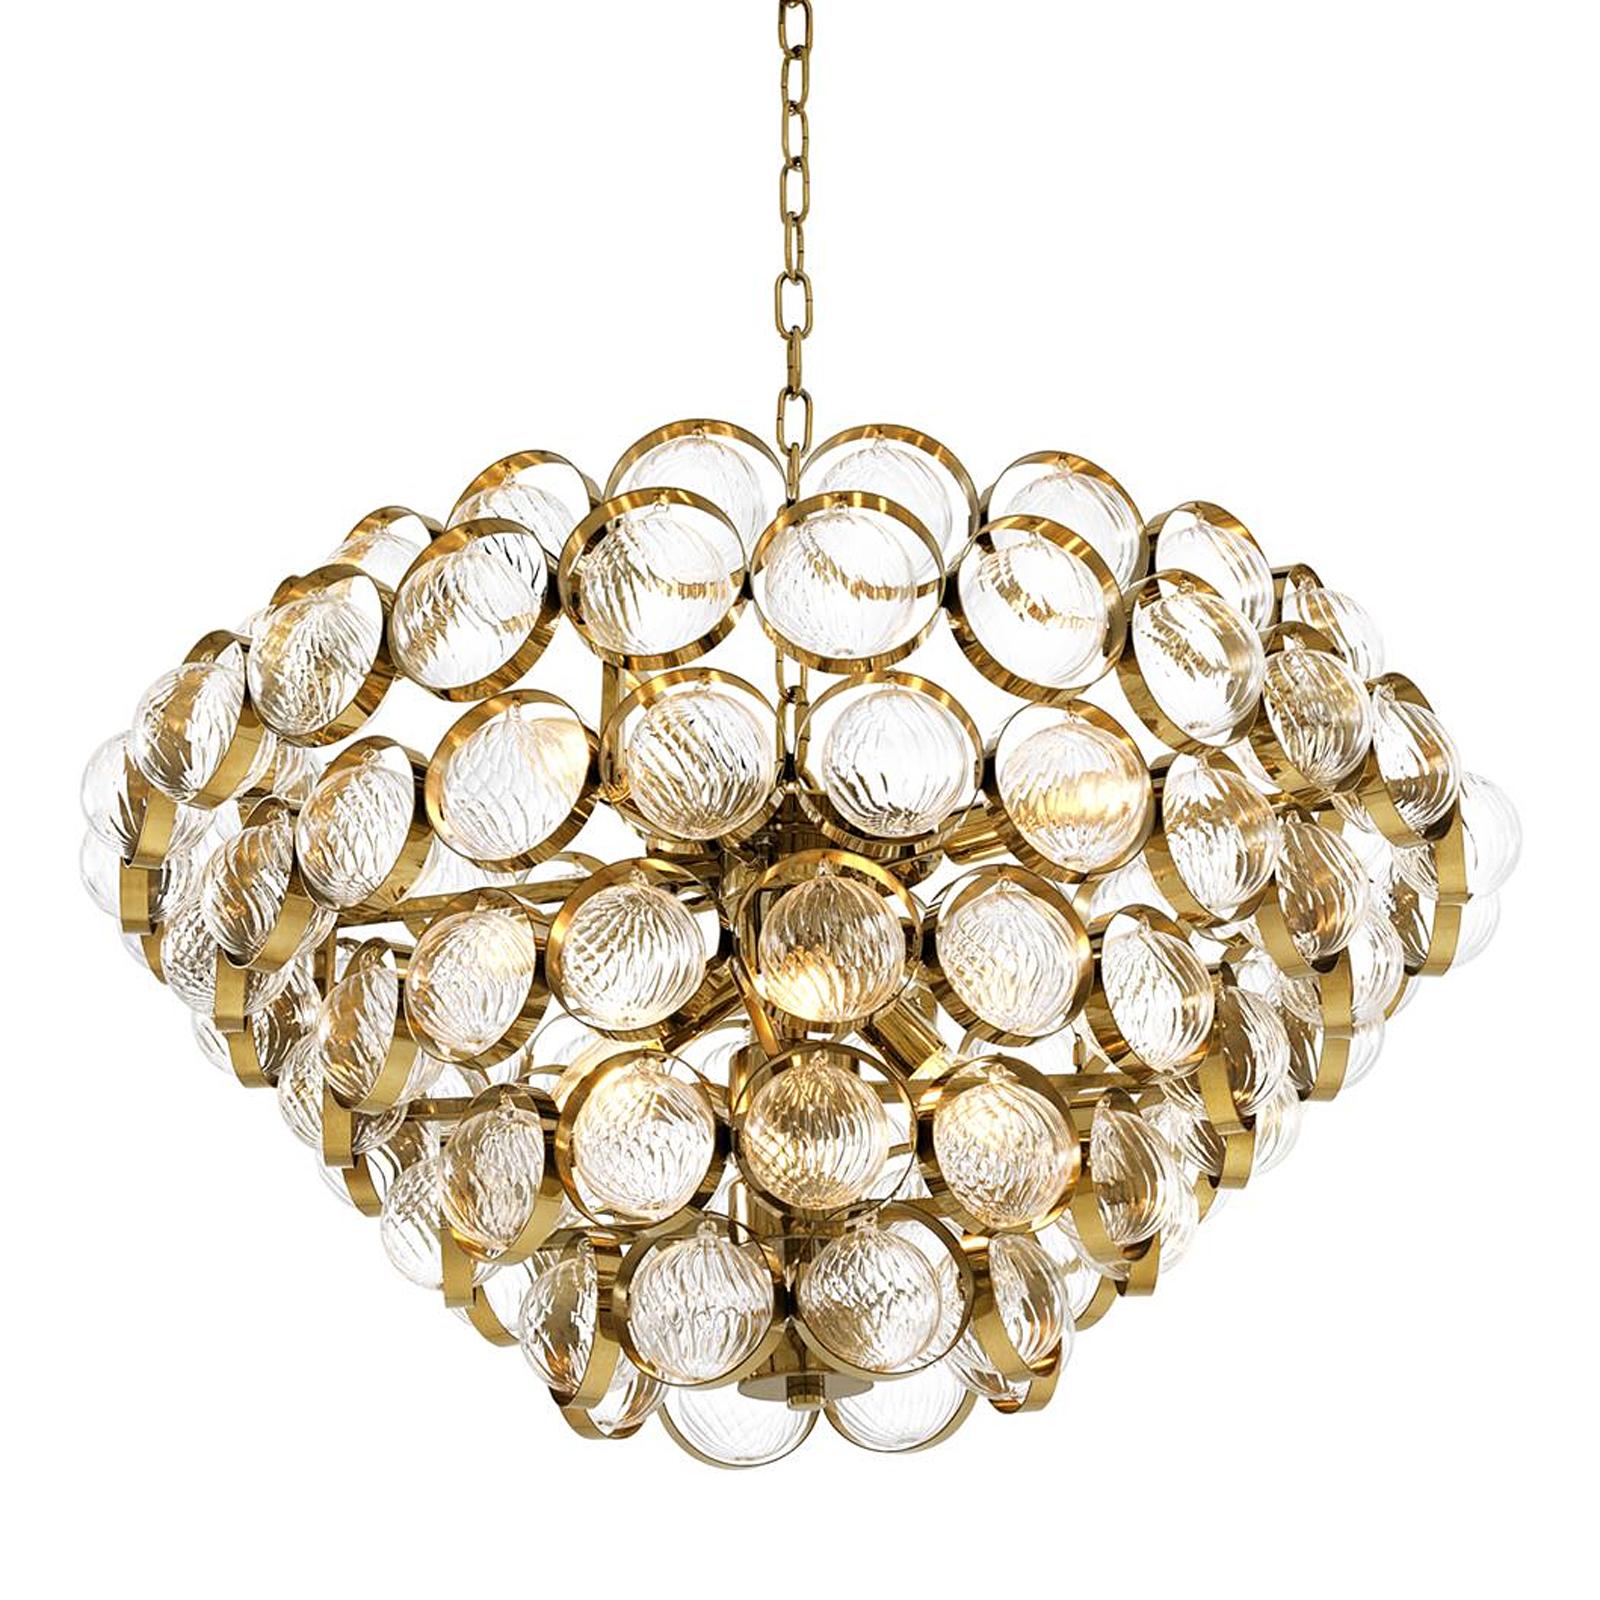 Chinese Pleyel Chandelier For Sale